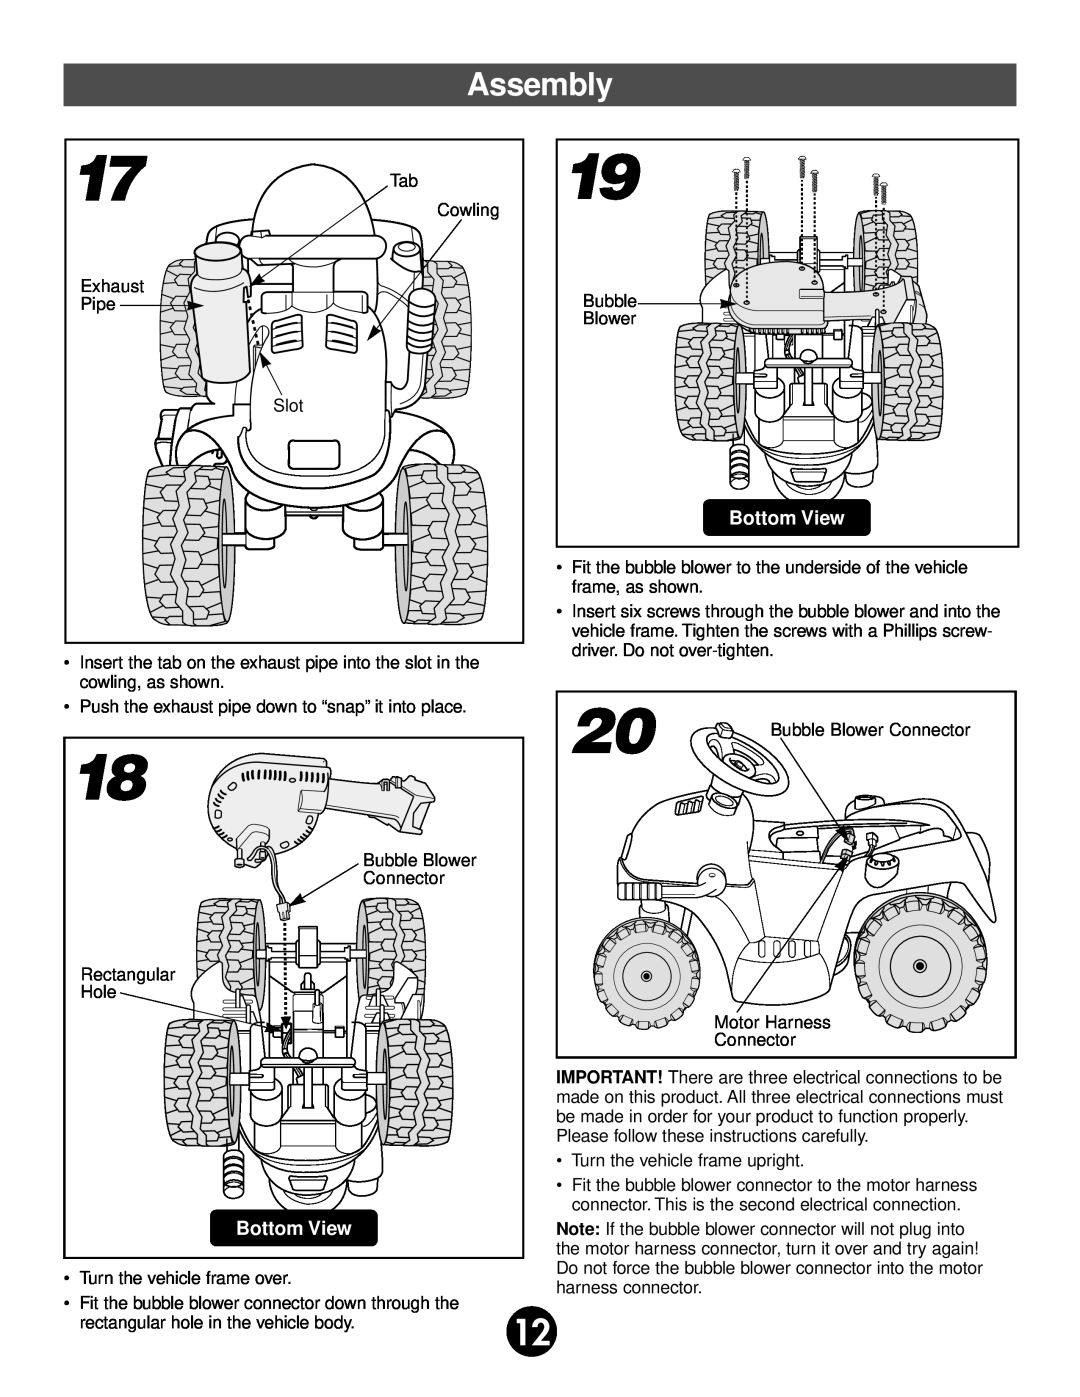 Fisher-Price 75320 owner manual Assembly, Bottom View 